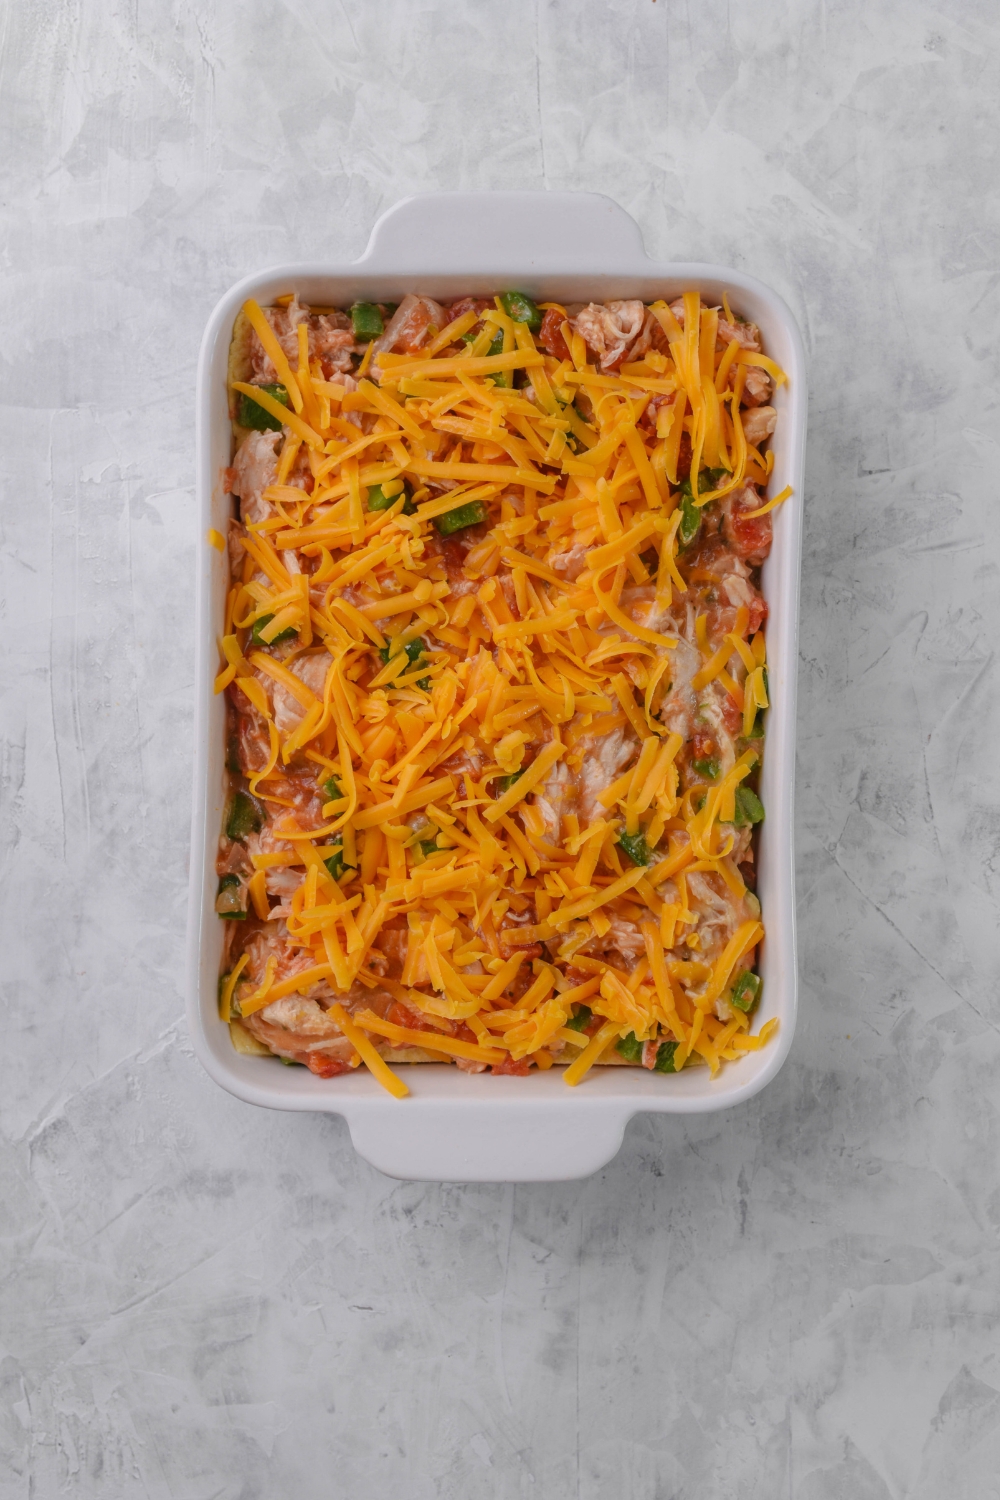 A baking dish filled with unbaked casserole covered in shredded cheese.